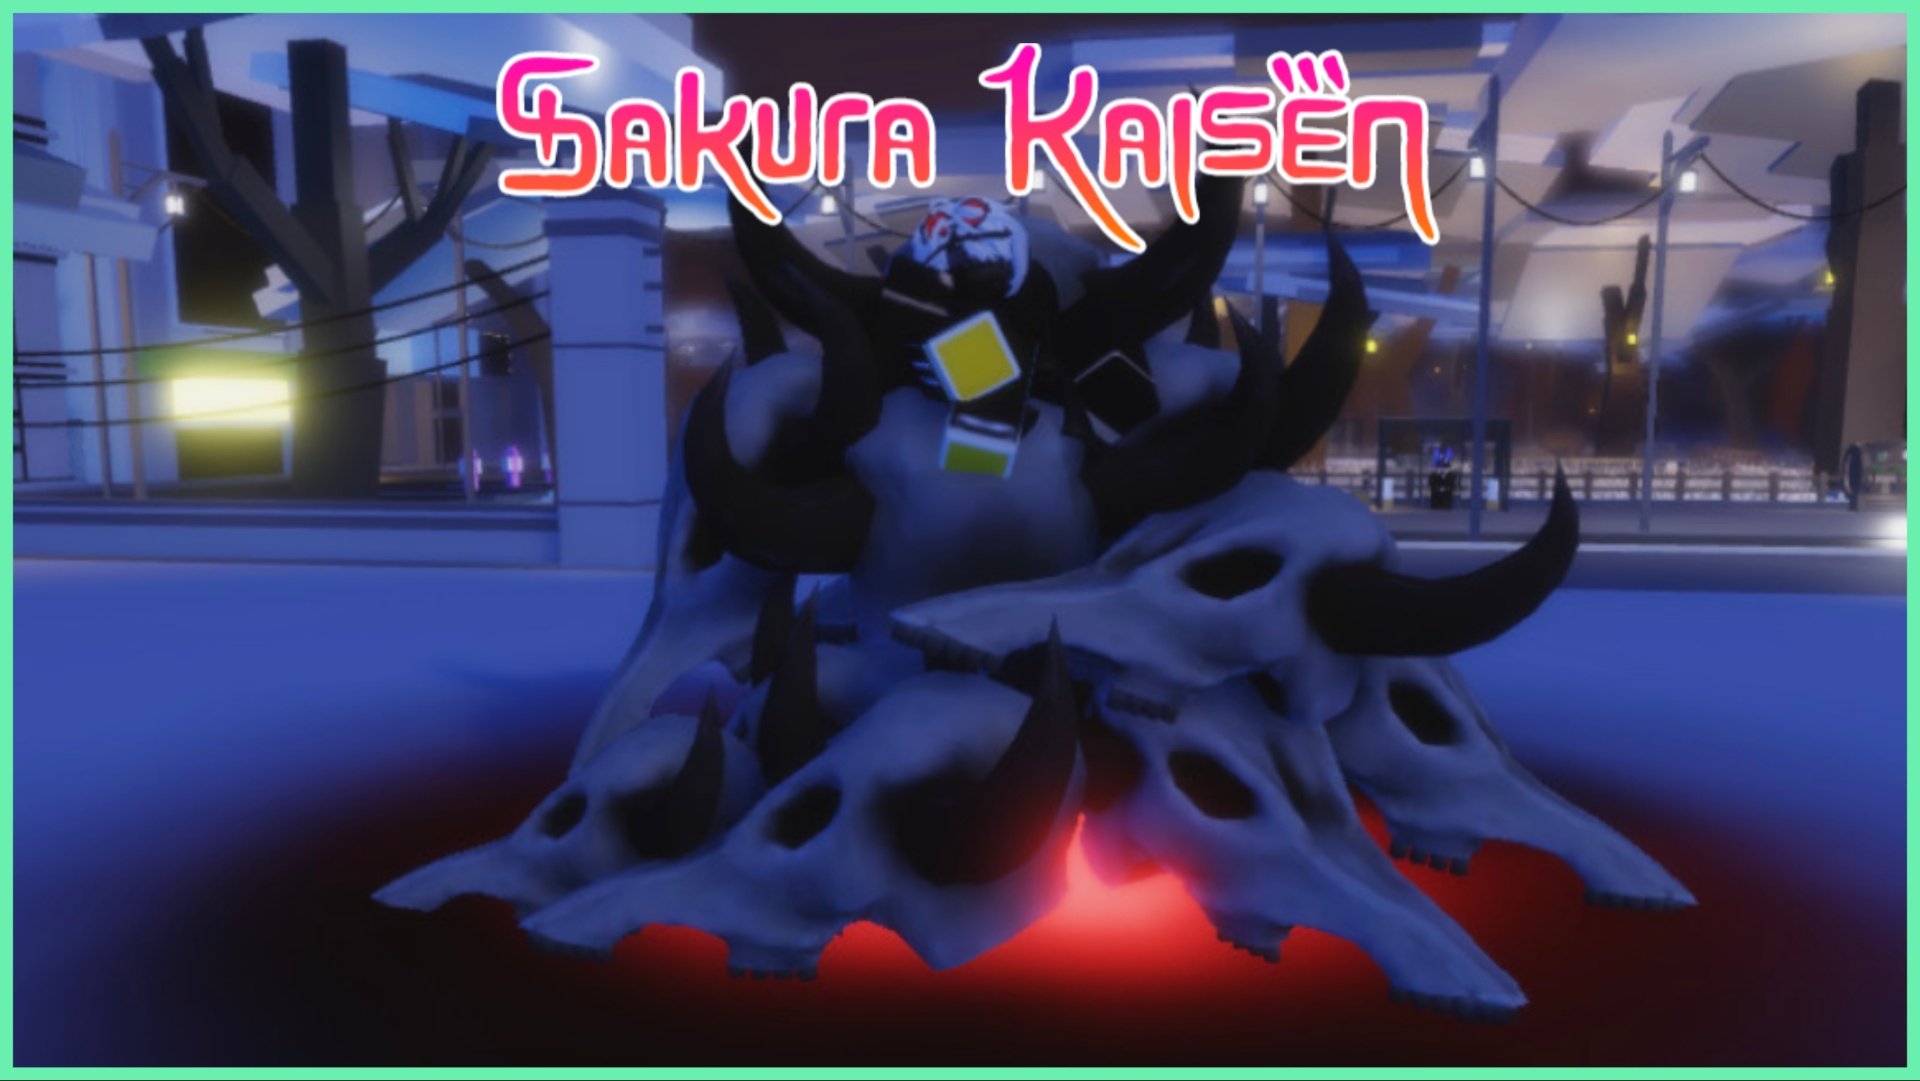 the image shows a ram head bone pile from sukunas domain and a pink title logo in the JJK font which reads "sakura kaisen"